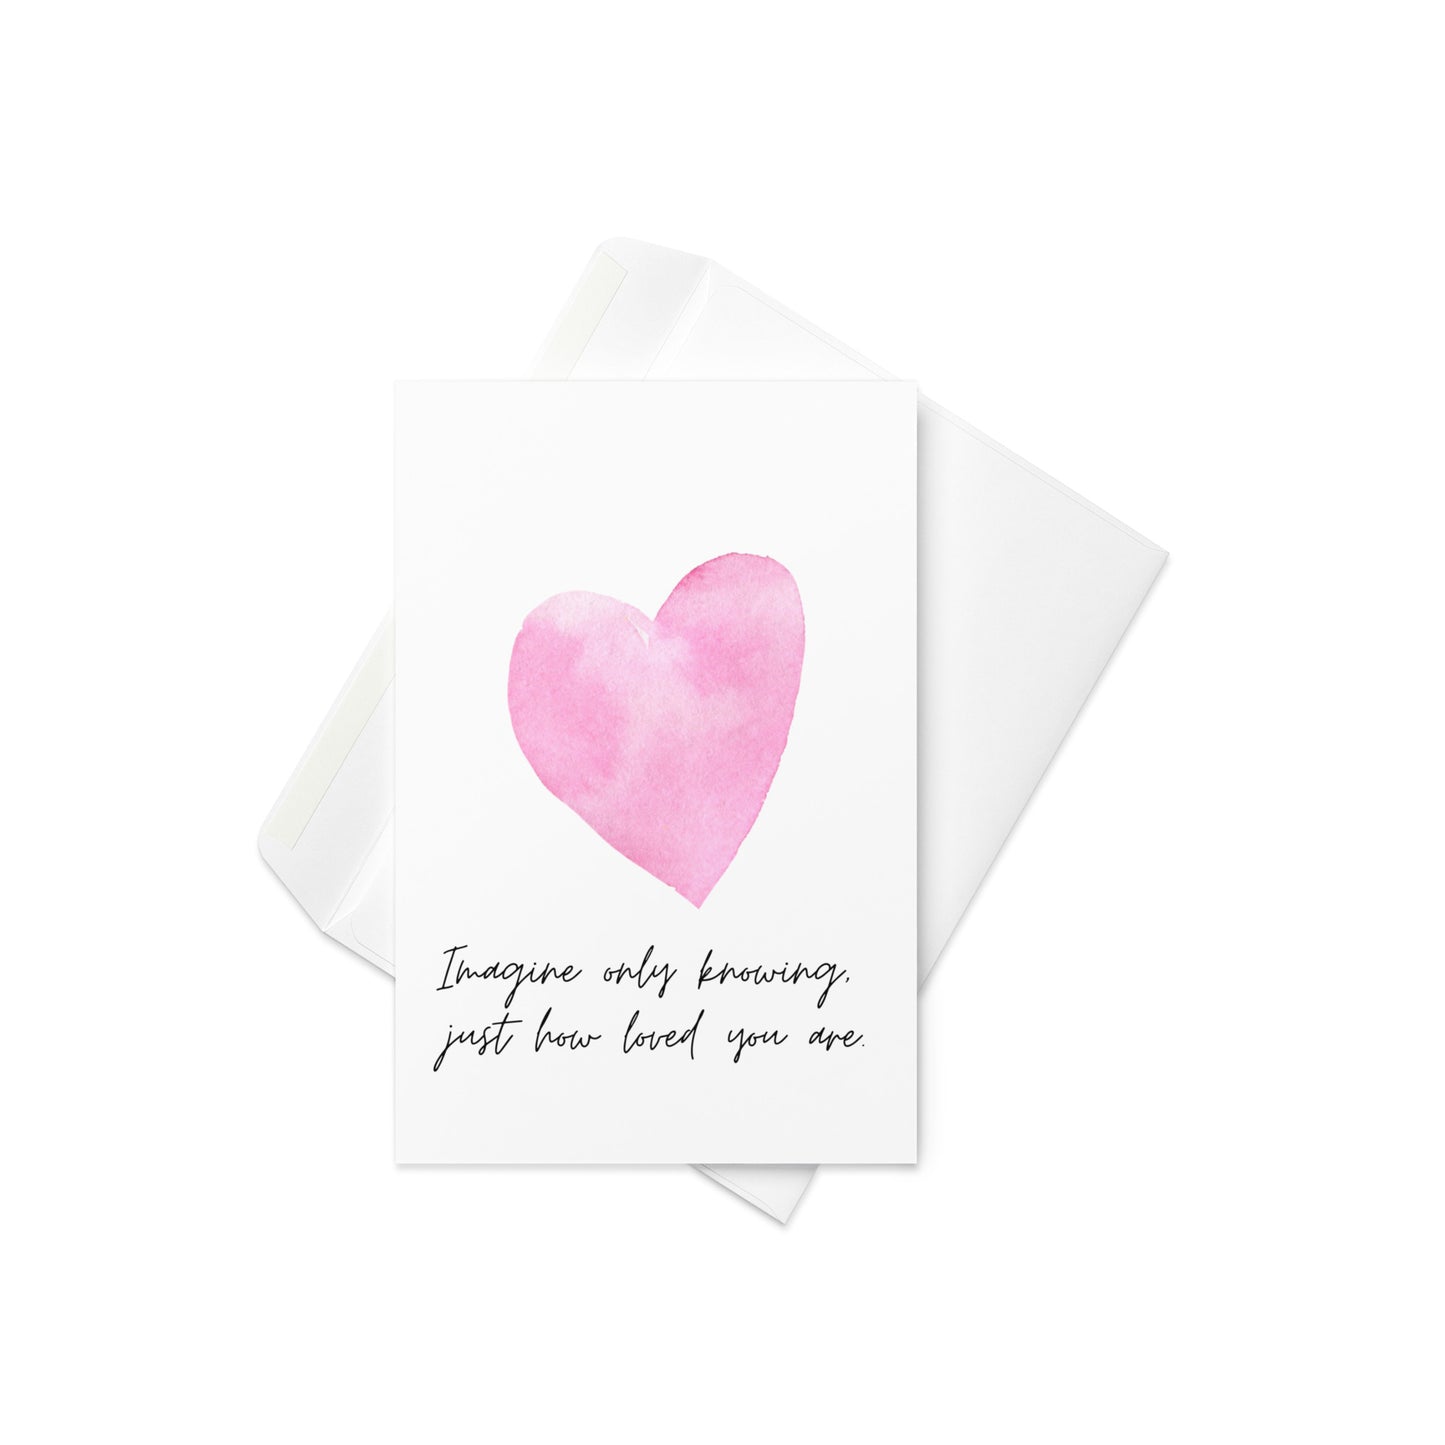 Imagine only knowing, just how loved you are. Sympathy Card - Pink